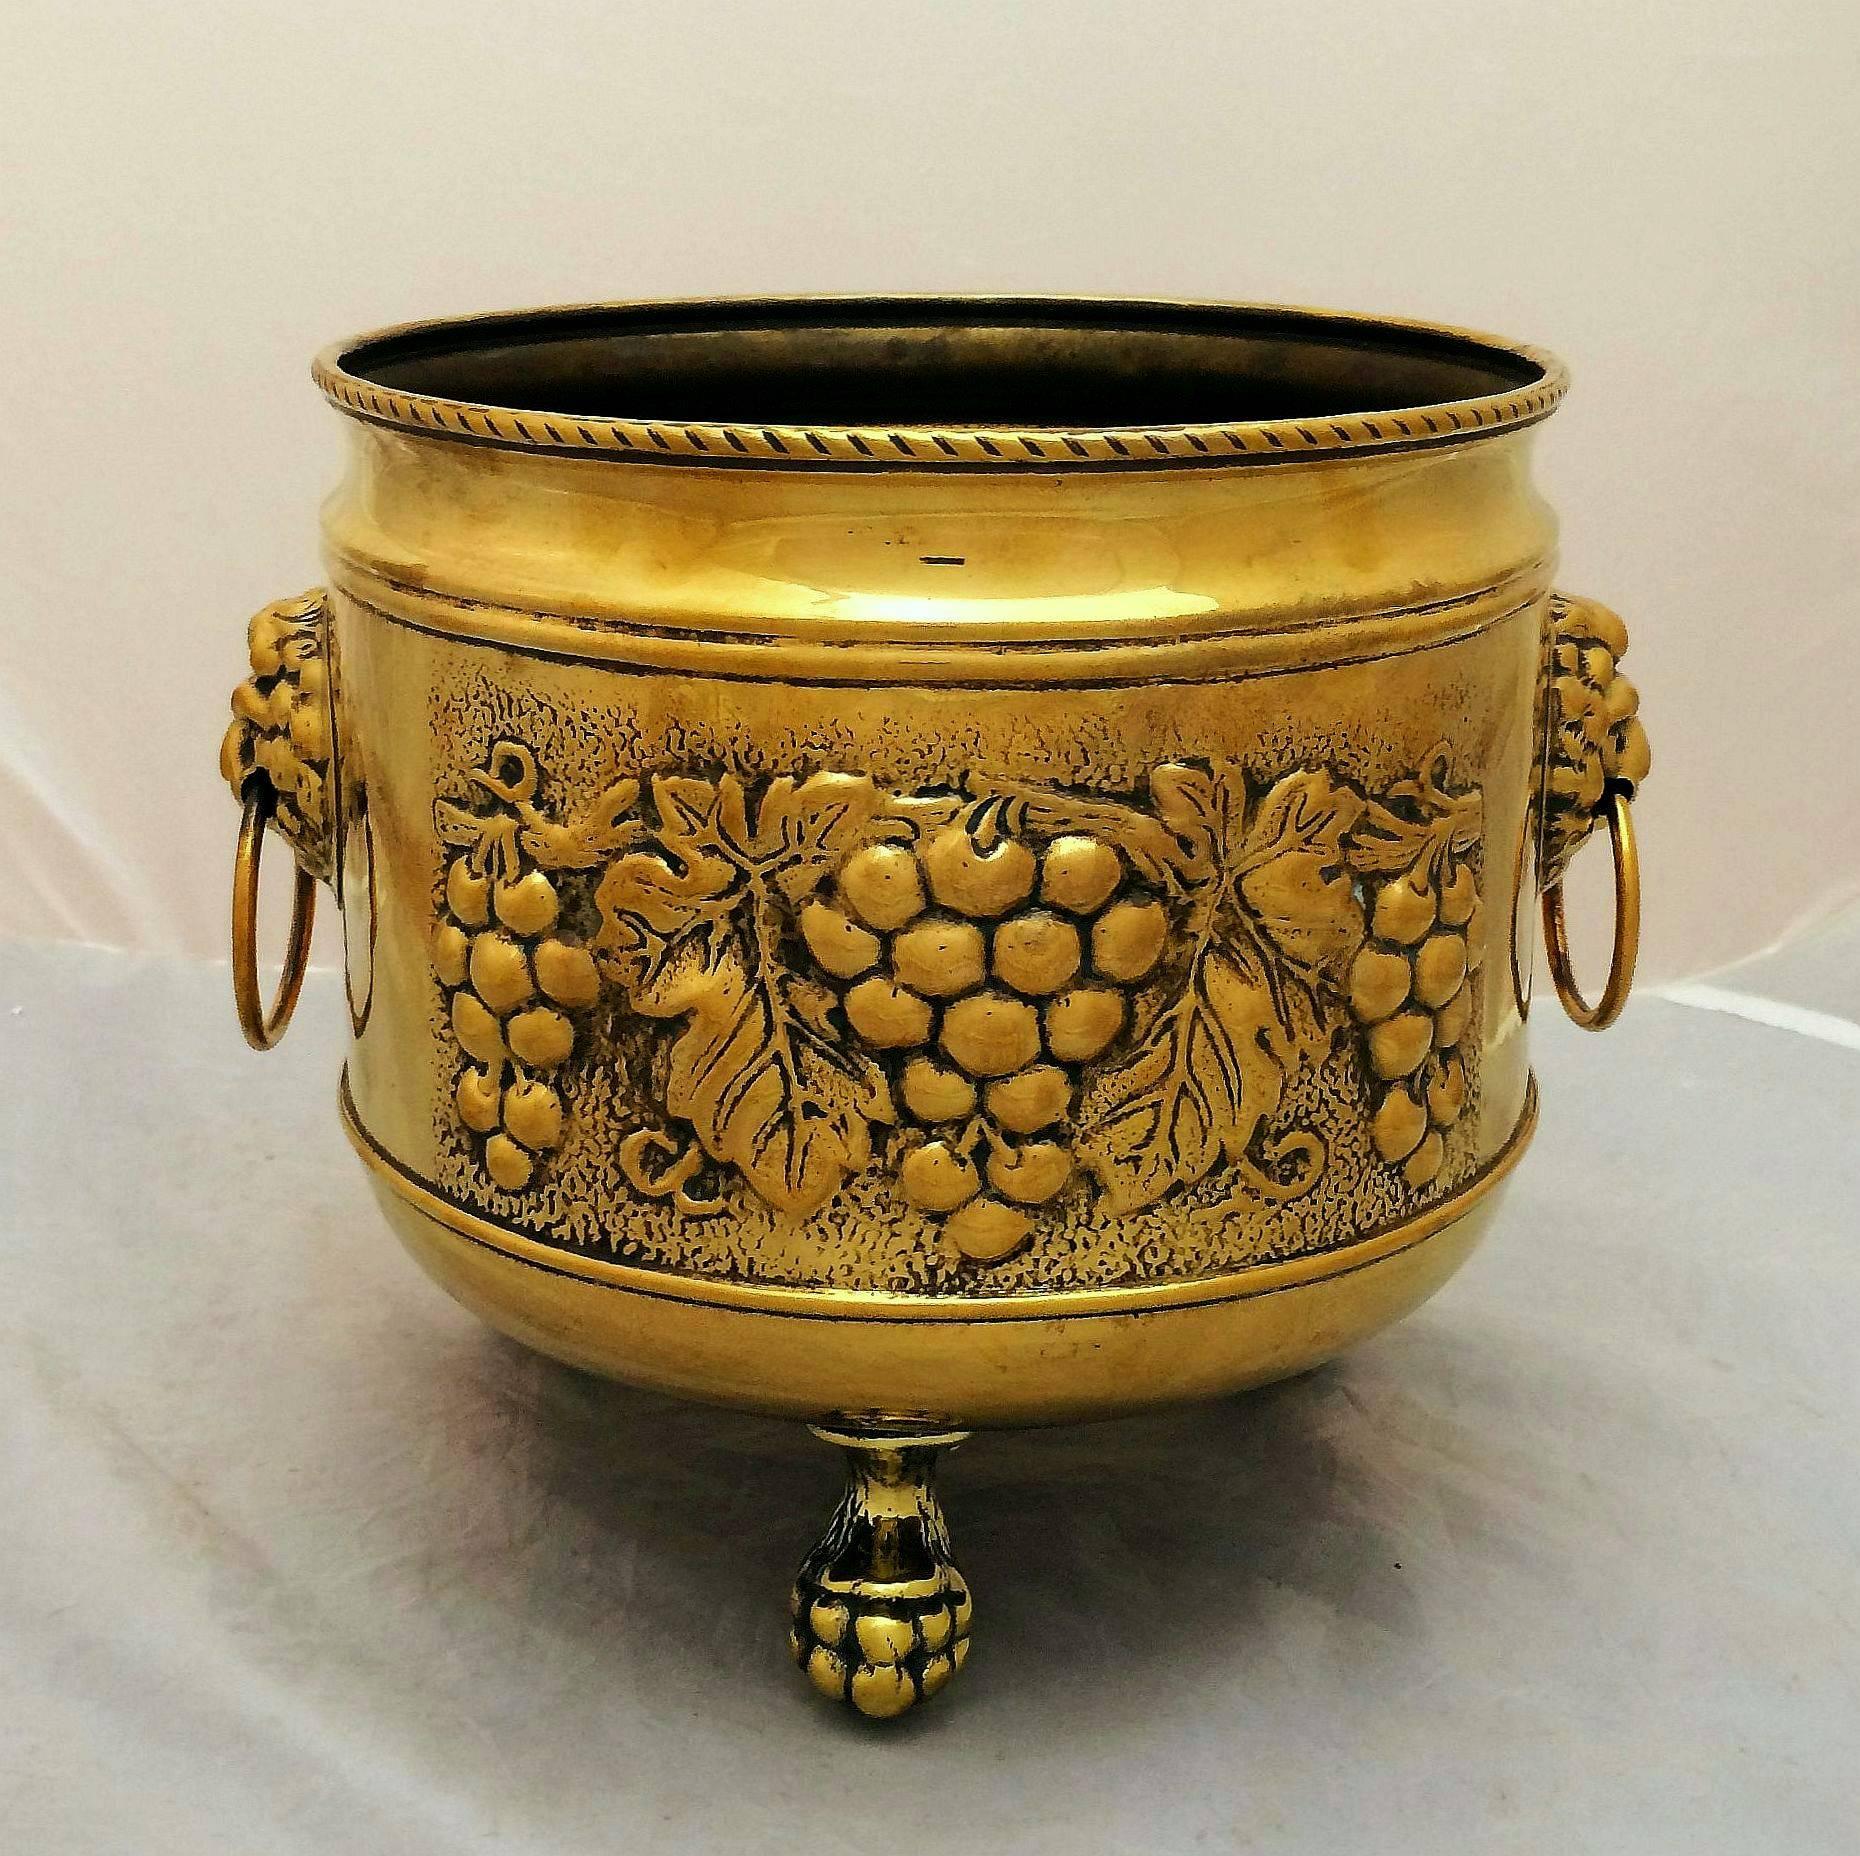 A handsome French jardiniere or planter of brass, featuring a rolled top edge with a repoussé design of grapes and grape leaves around the circumference, with two opposing lion's head ring handles, and resting on three ball-and-claw feet.